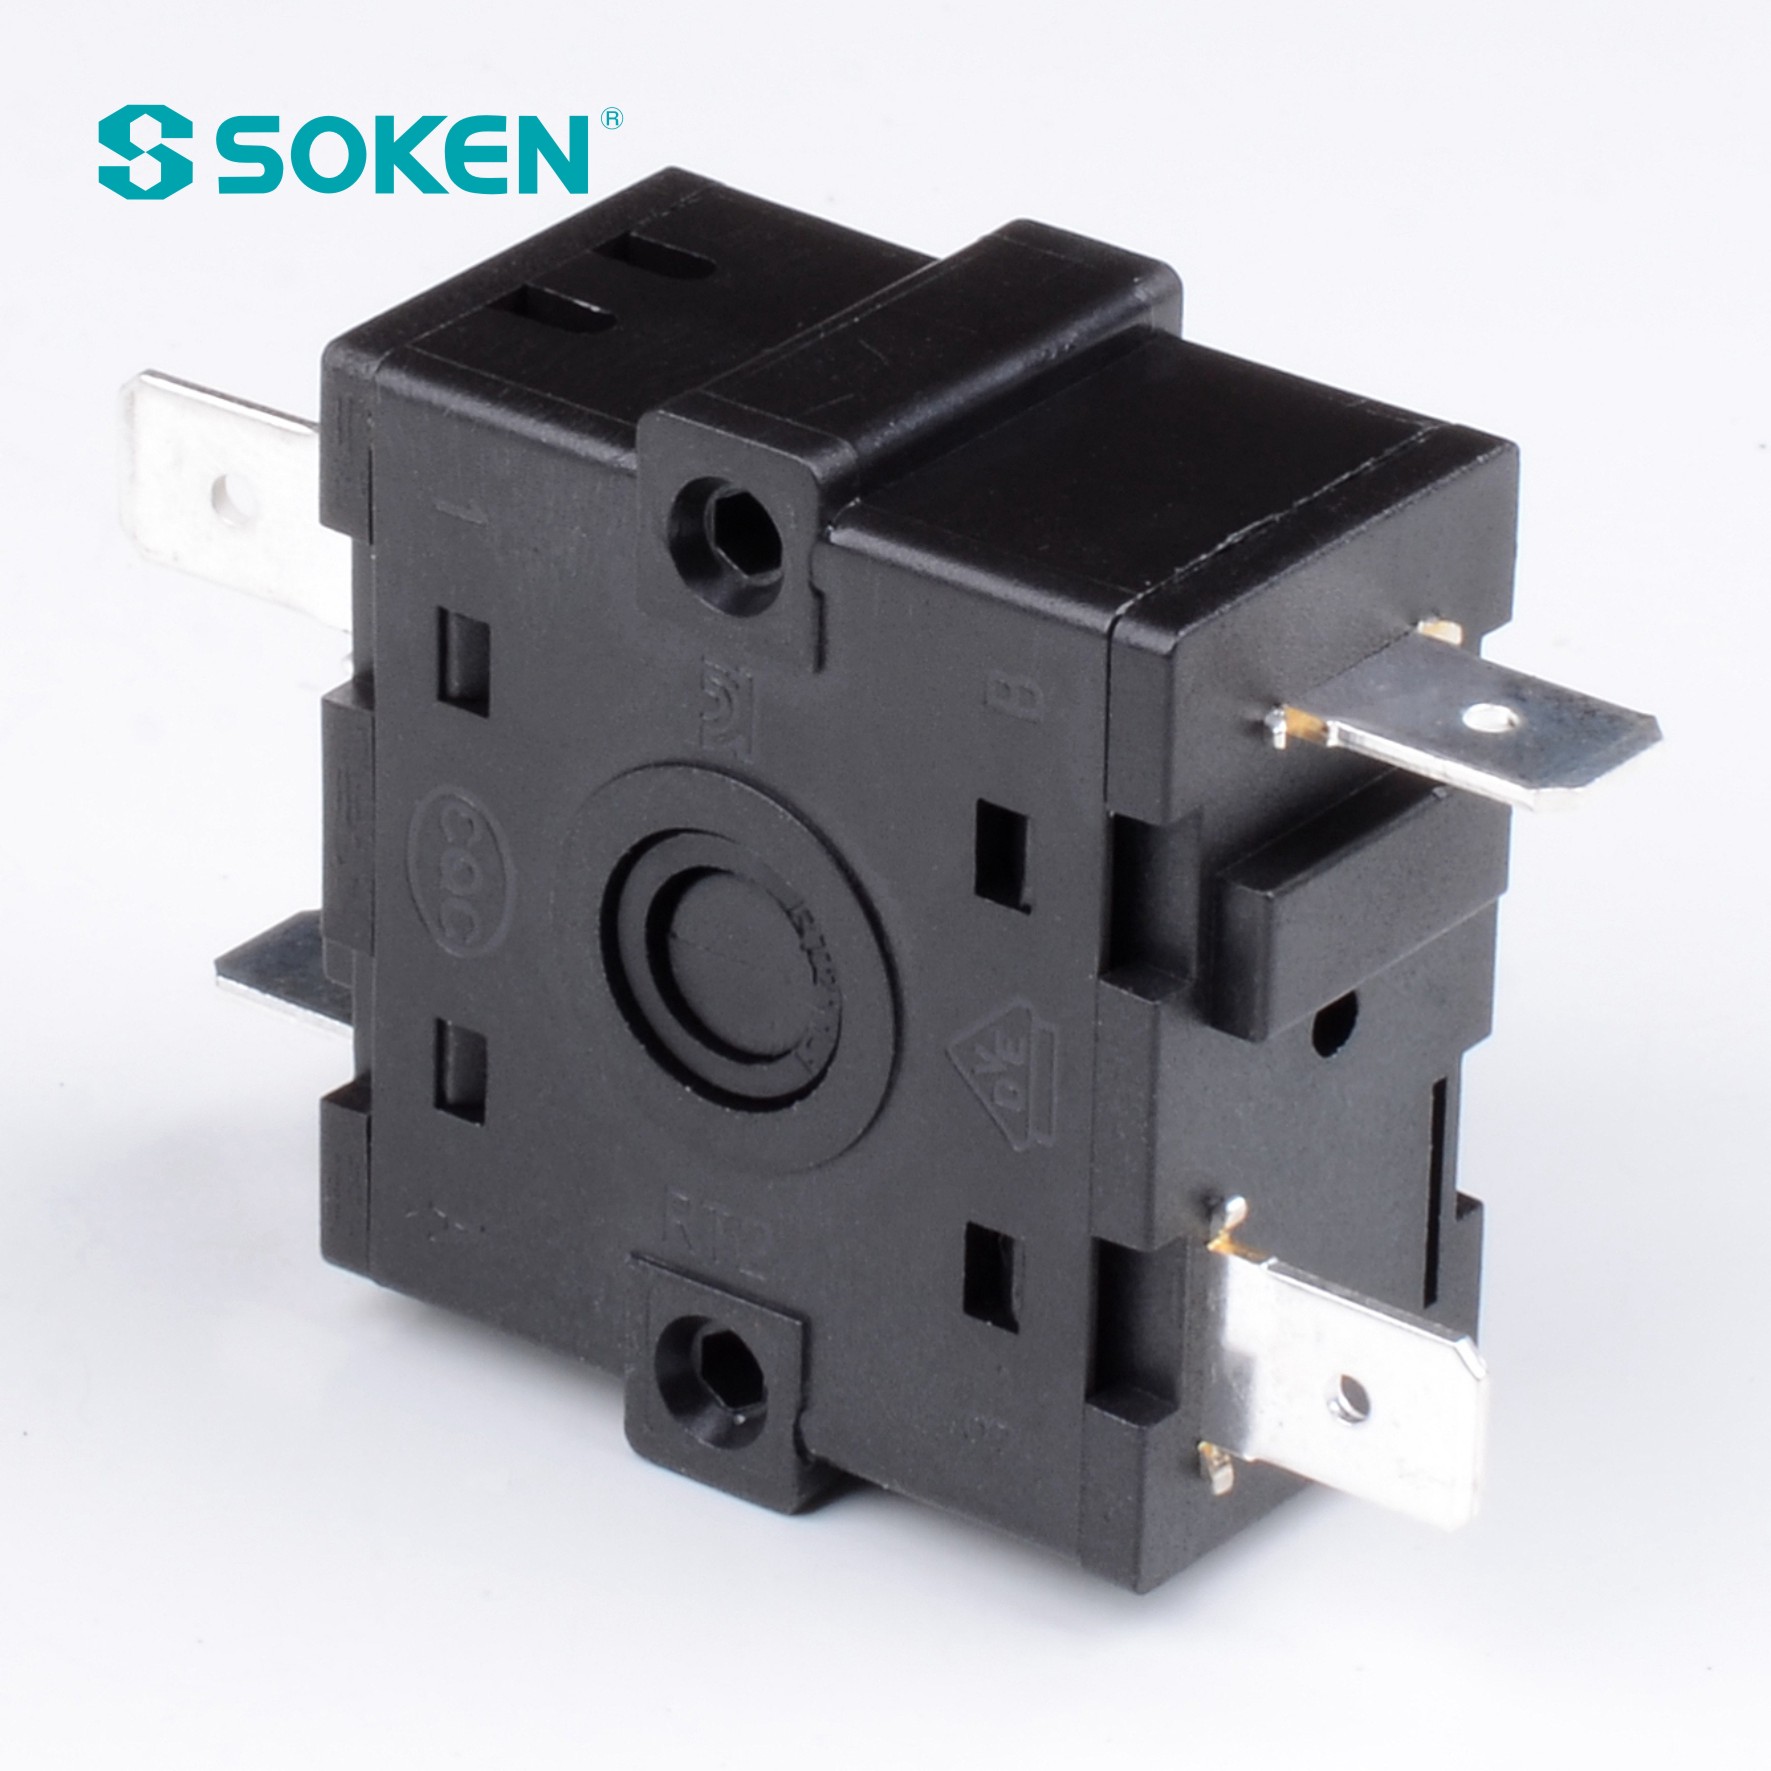 6 Position Rotary Switch para sa Heater (RT253-3)